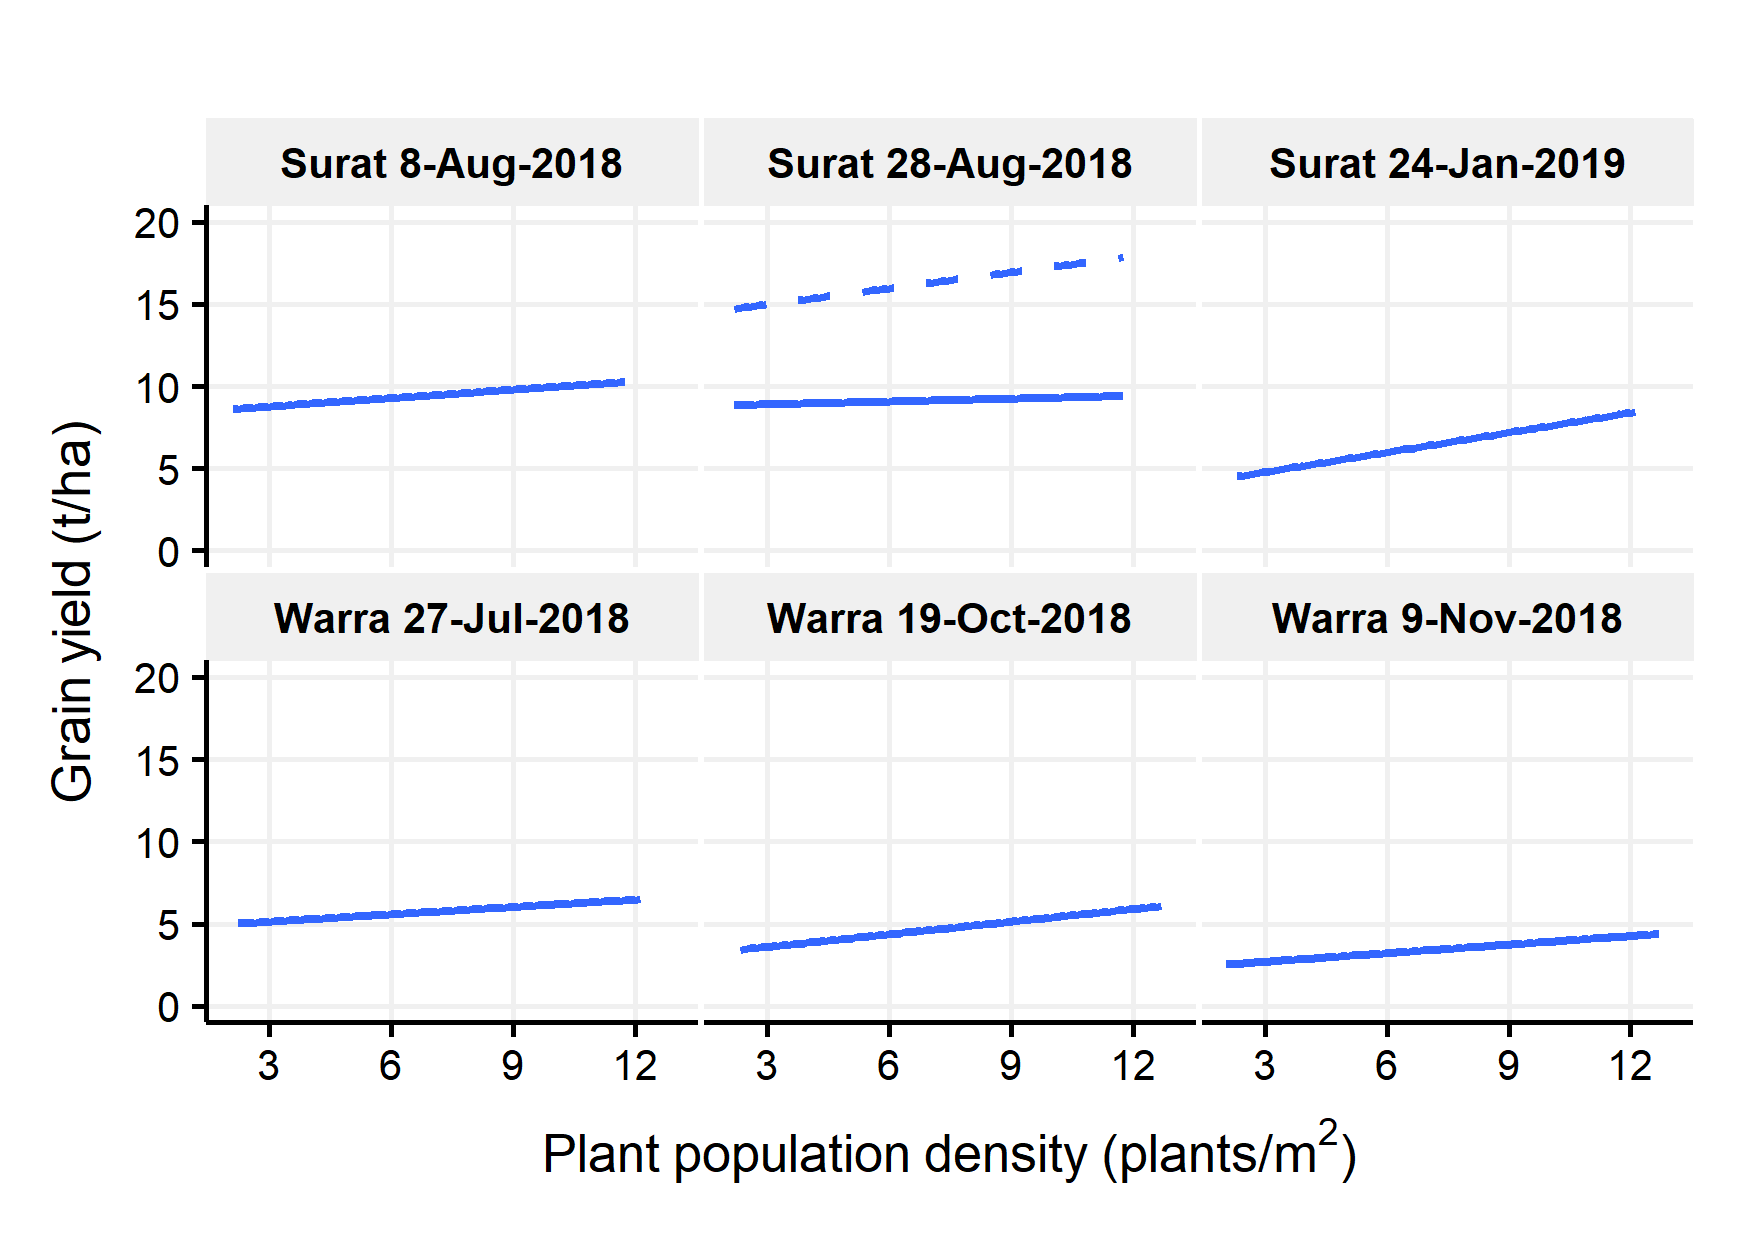 These six line graphs show the effect of plant population density on sorghum grain yields averaged across all hybrids for three sowing times at Surat and Warra trial sites for the 2018-2019 summer cropping season. Solid lines indicate grain yield (dry weights) for sown crops and dashed lines show combined sown and ratoon crop yields for the Surat 28-Aug-2018 sowing.